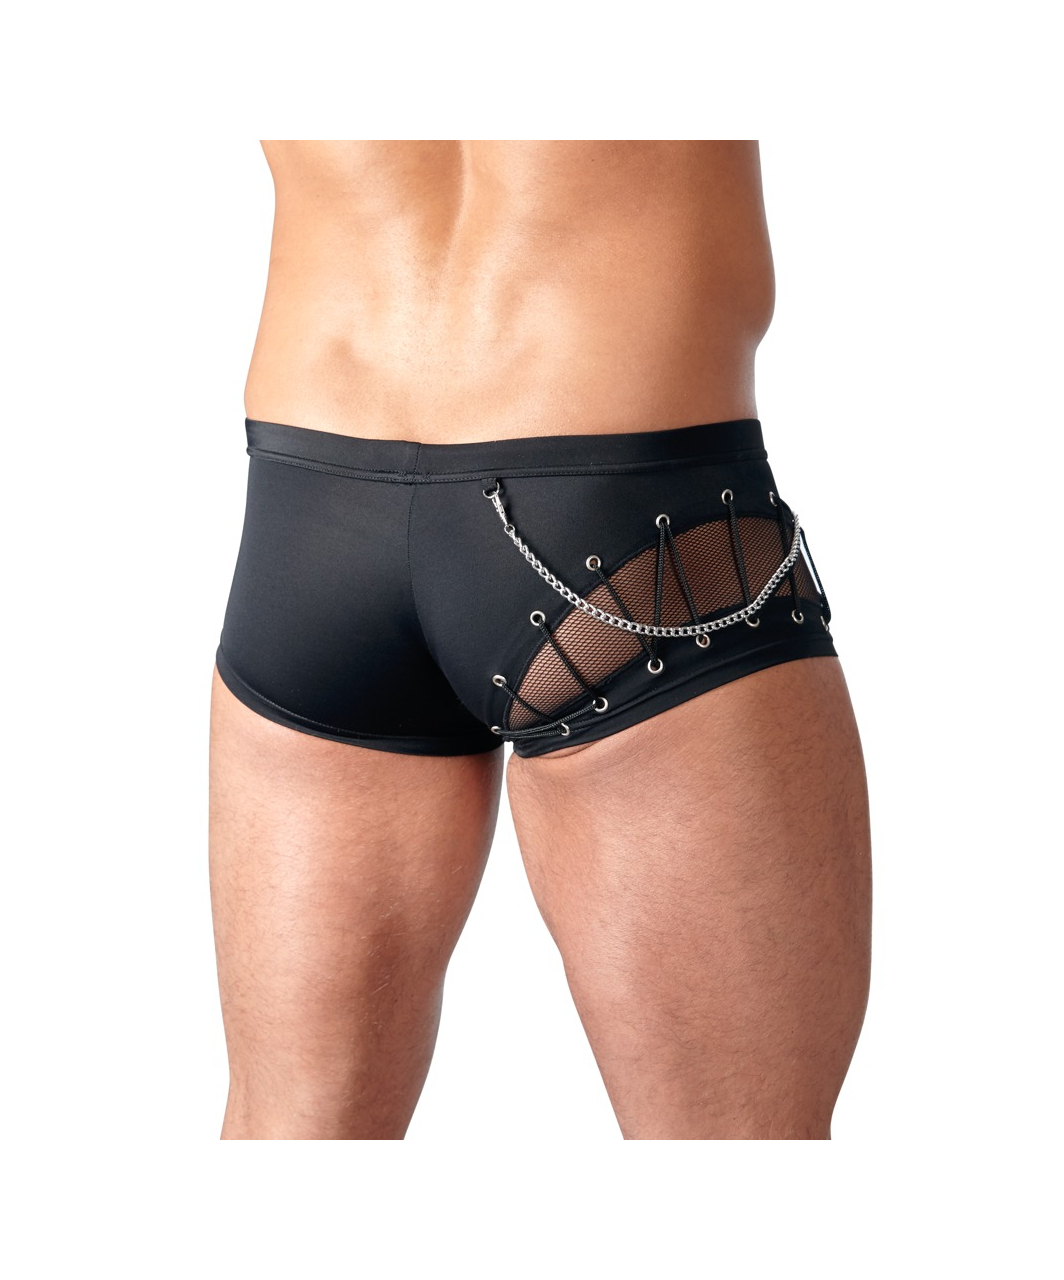 Svenjoyment black trunks with lacing and mesh